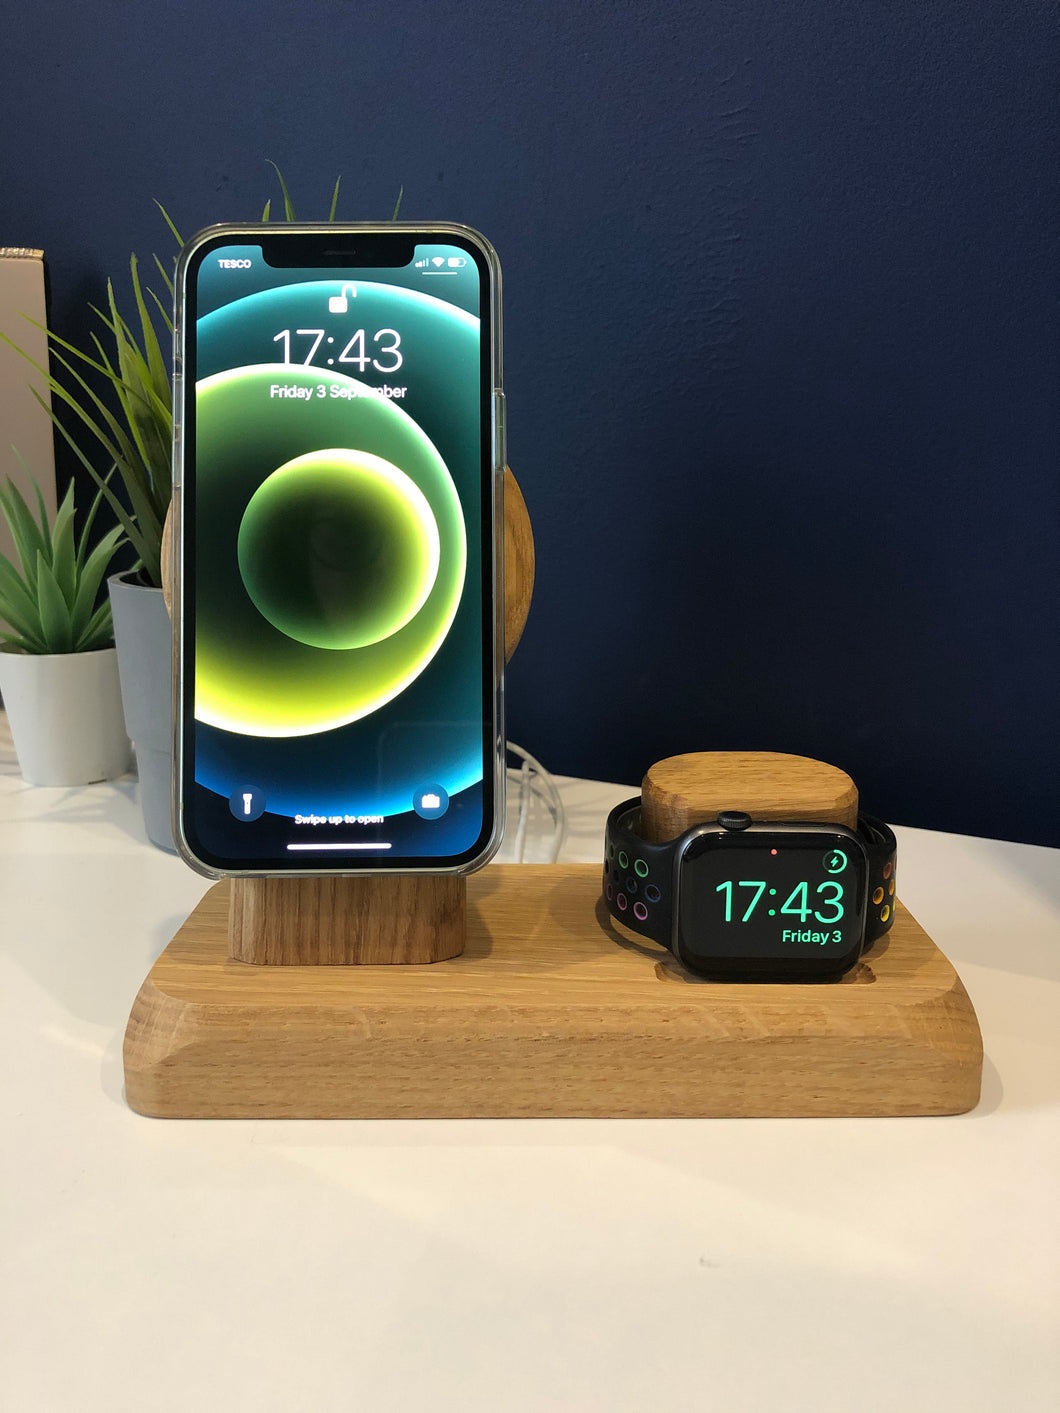 Solid oak iPhone and Apple Watch MagSafe charging station, wireless dock, desk or bedside accessory, can be personalised